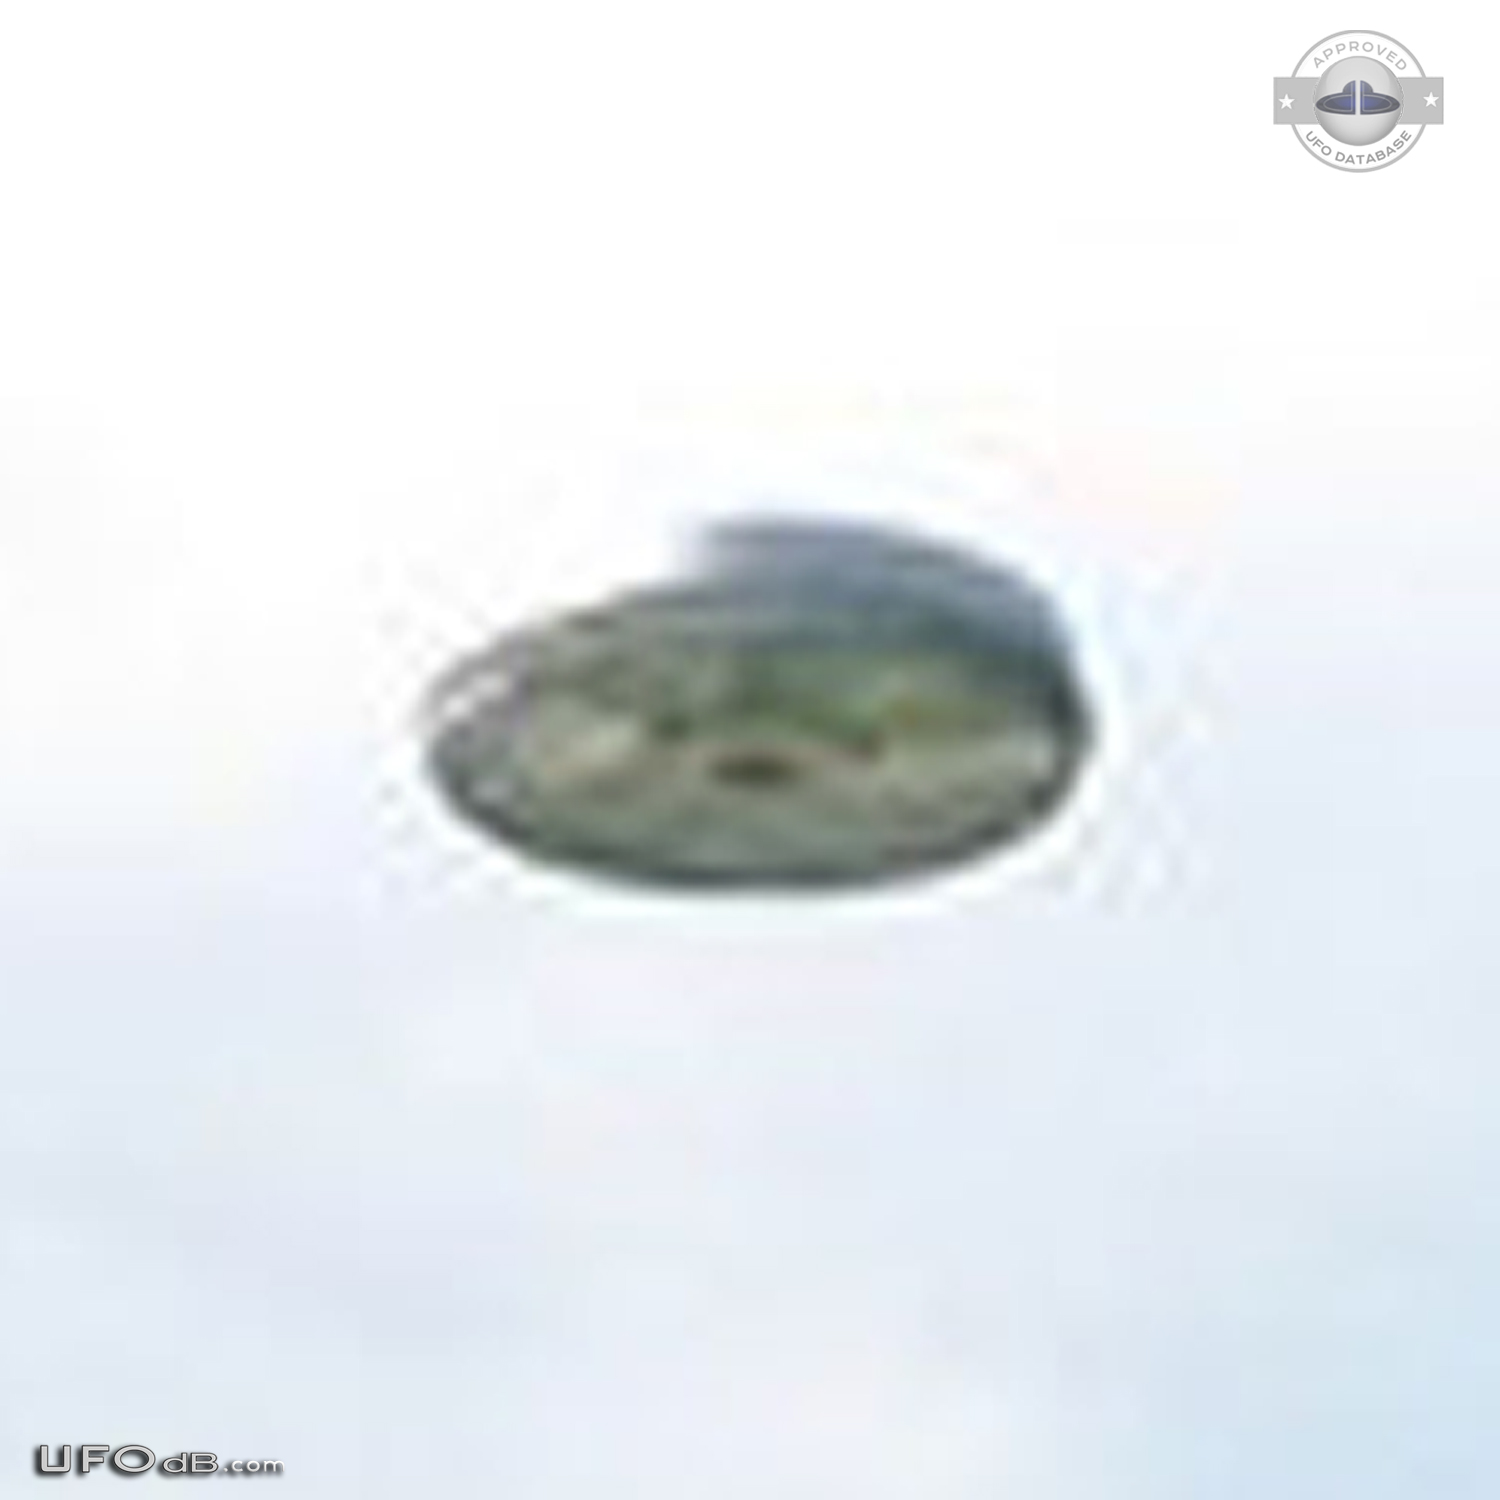 Cylinder UFO appear with a Flash but caught on picture - Tuzla Bosnia UFO Picture #532-4